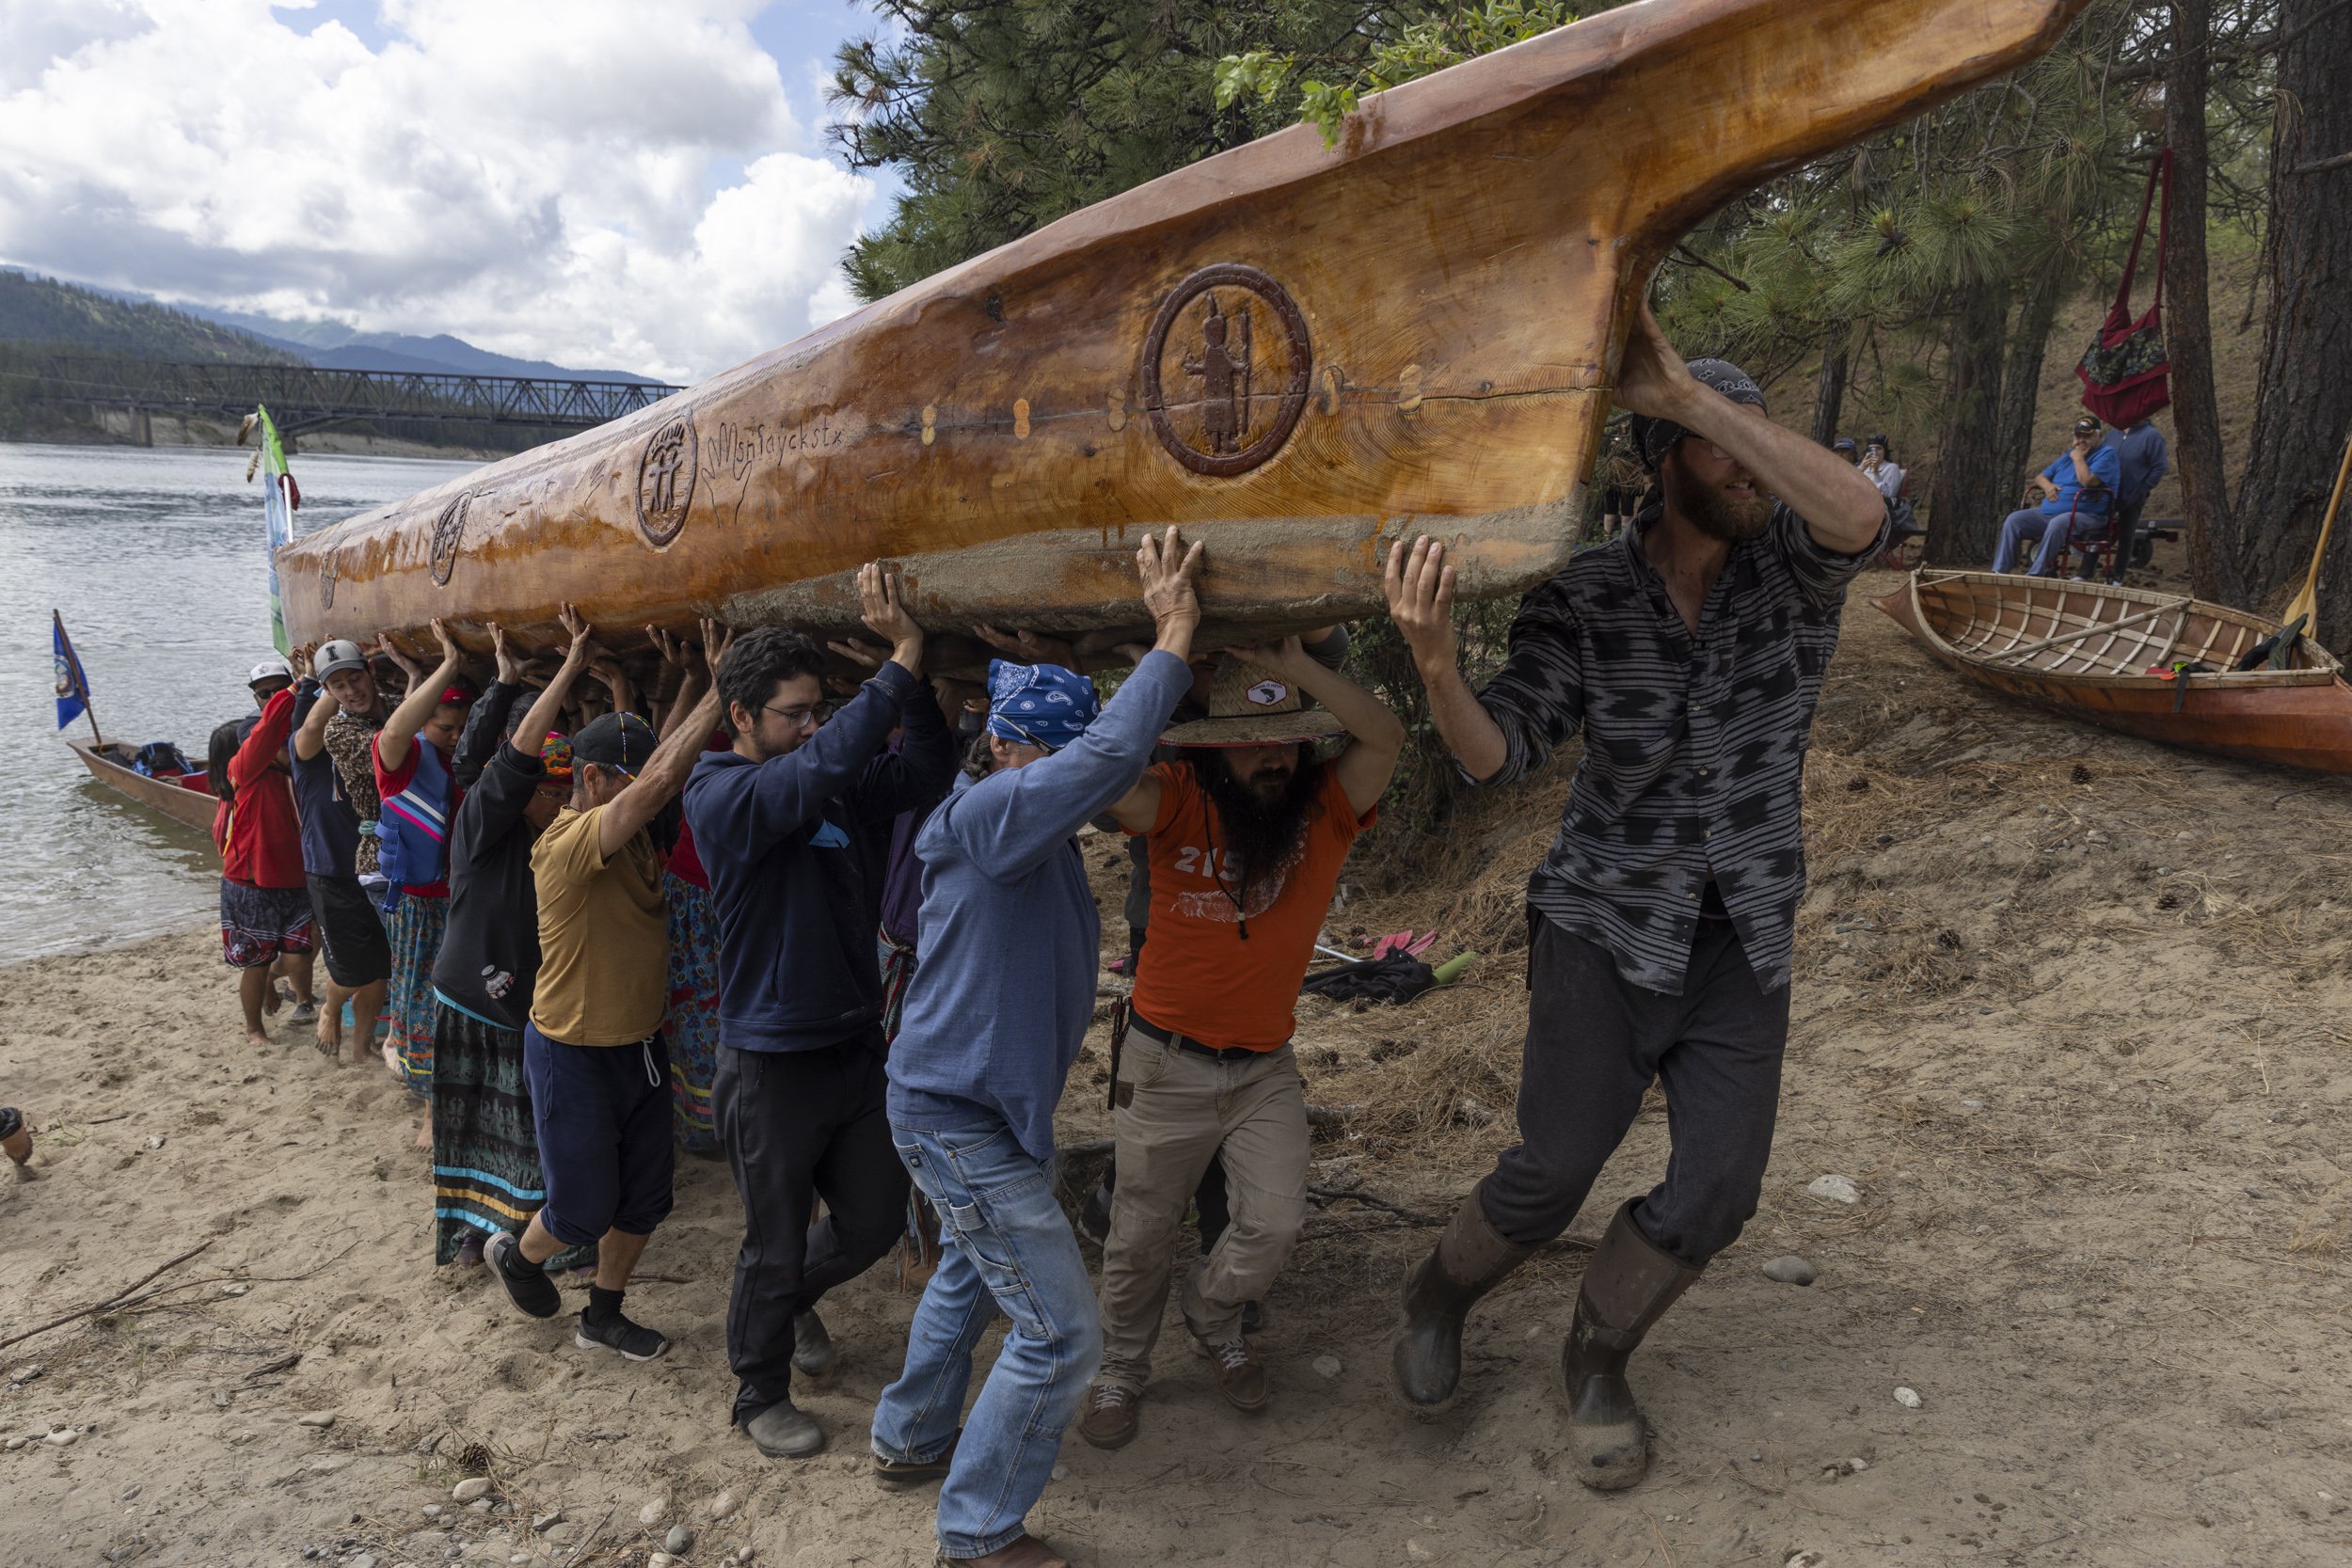  As a show of respect for the canoes, they are carefully lifted out of the water. This canoe is carved from an old growth cedar log. 